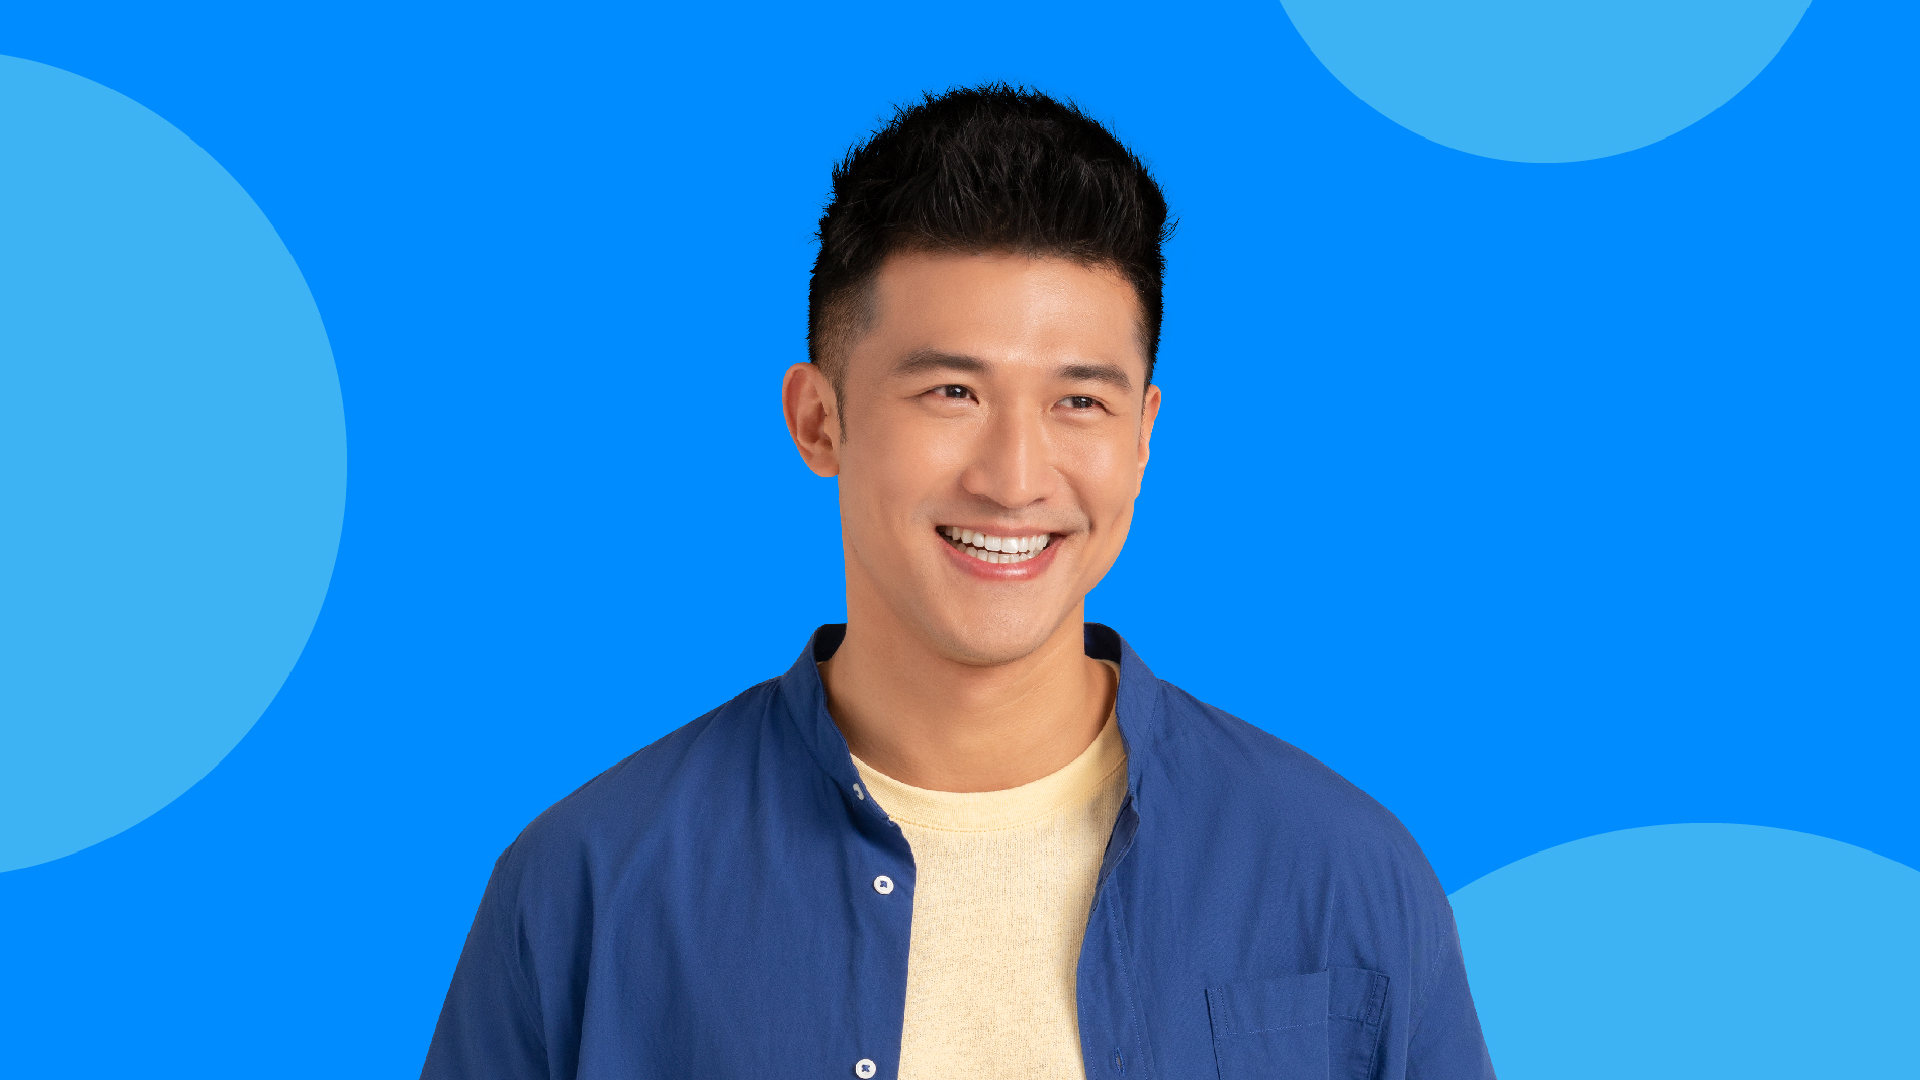 A man smiling wide against a blue background